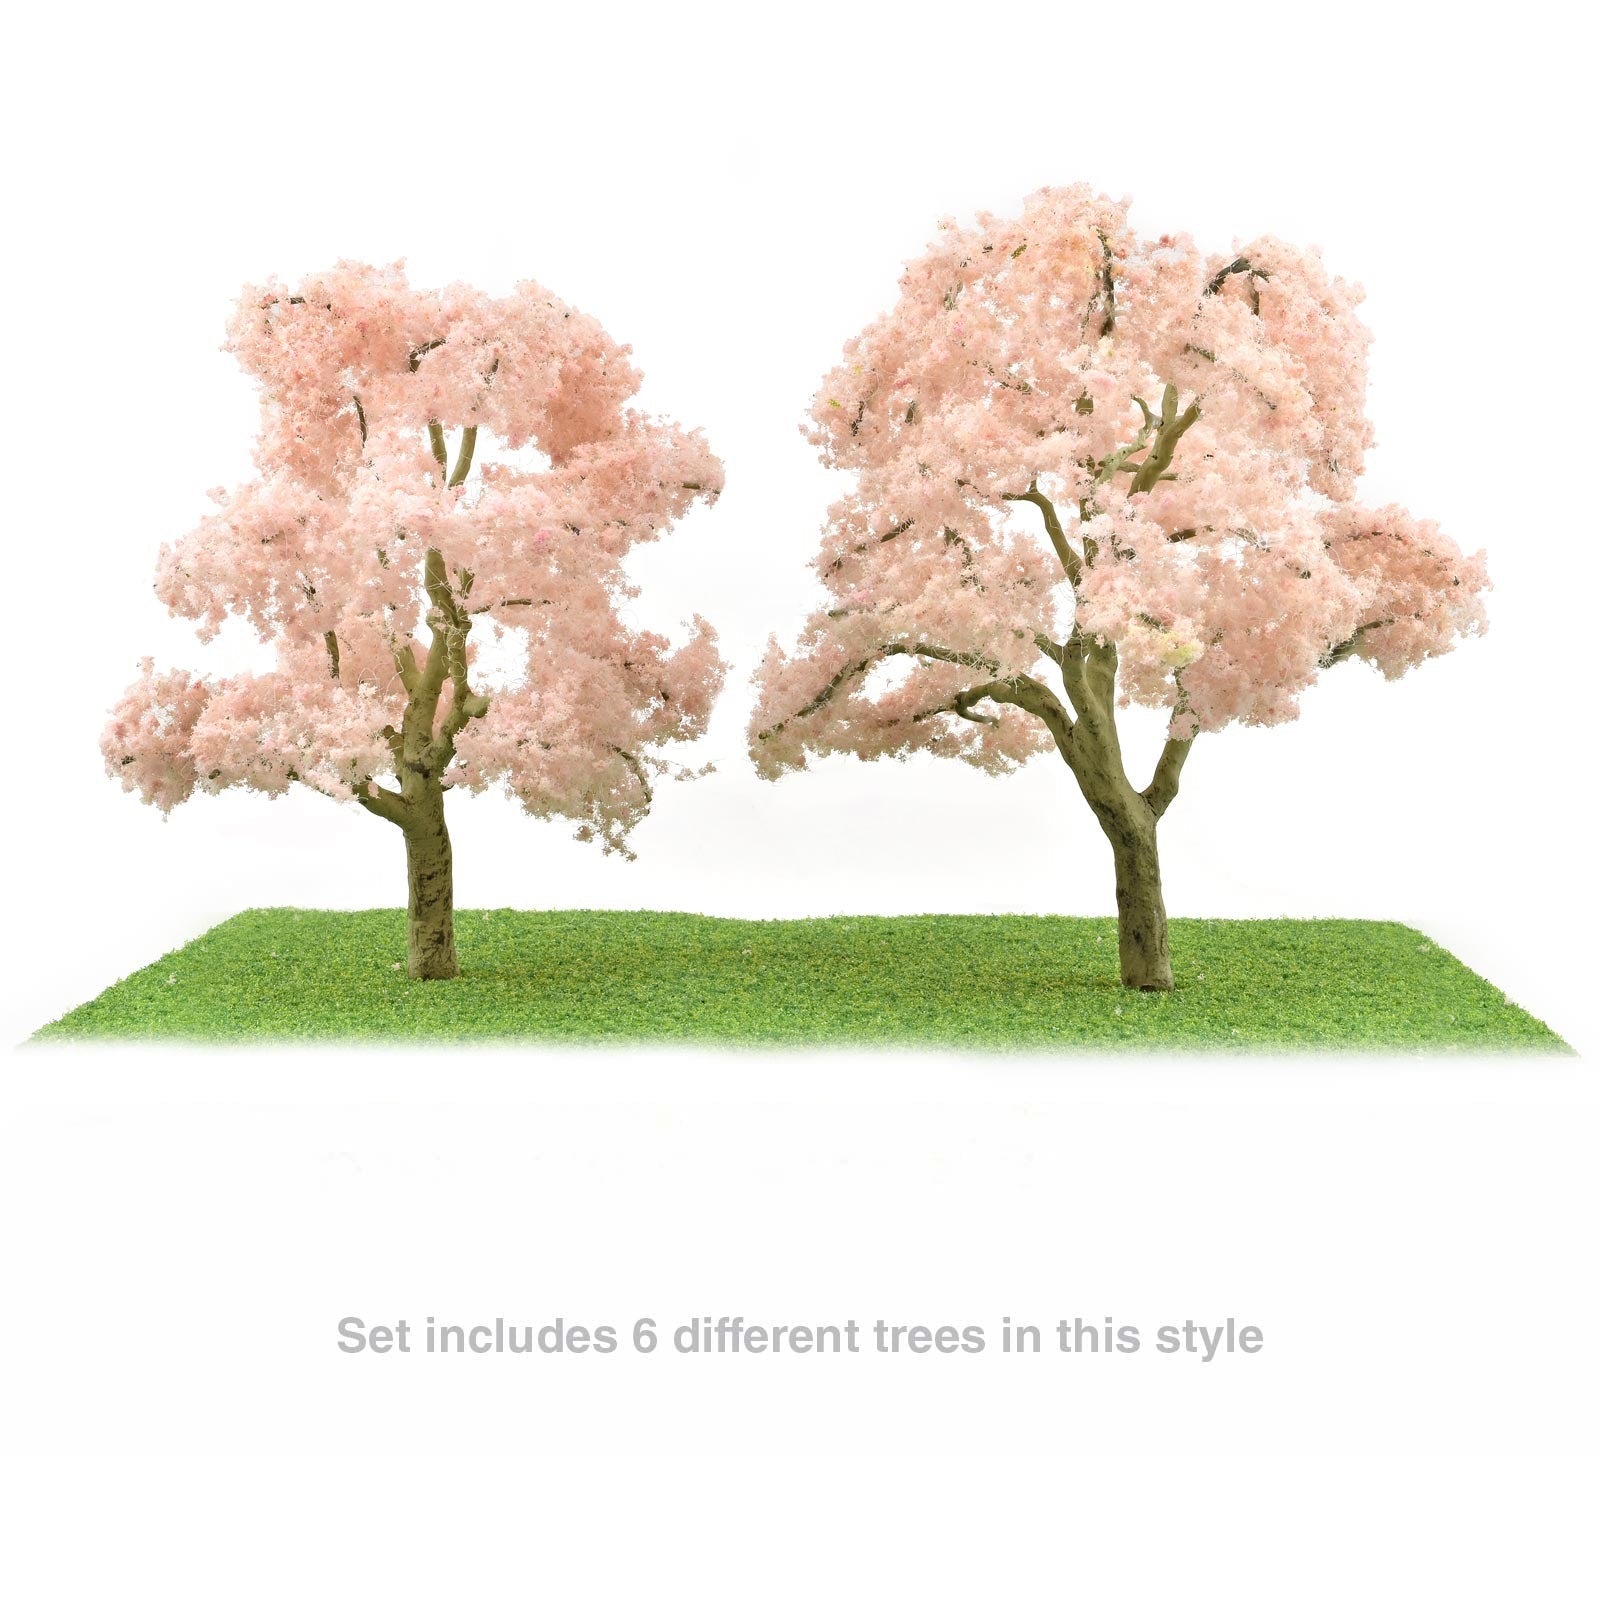 JTT Scenery Products Cherry Blossom Grove 3 - 3 1/2" High, 6 Pieces